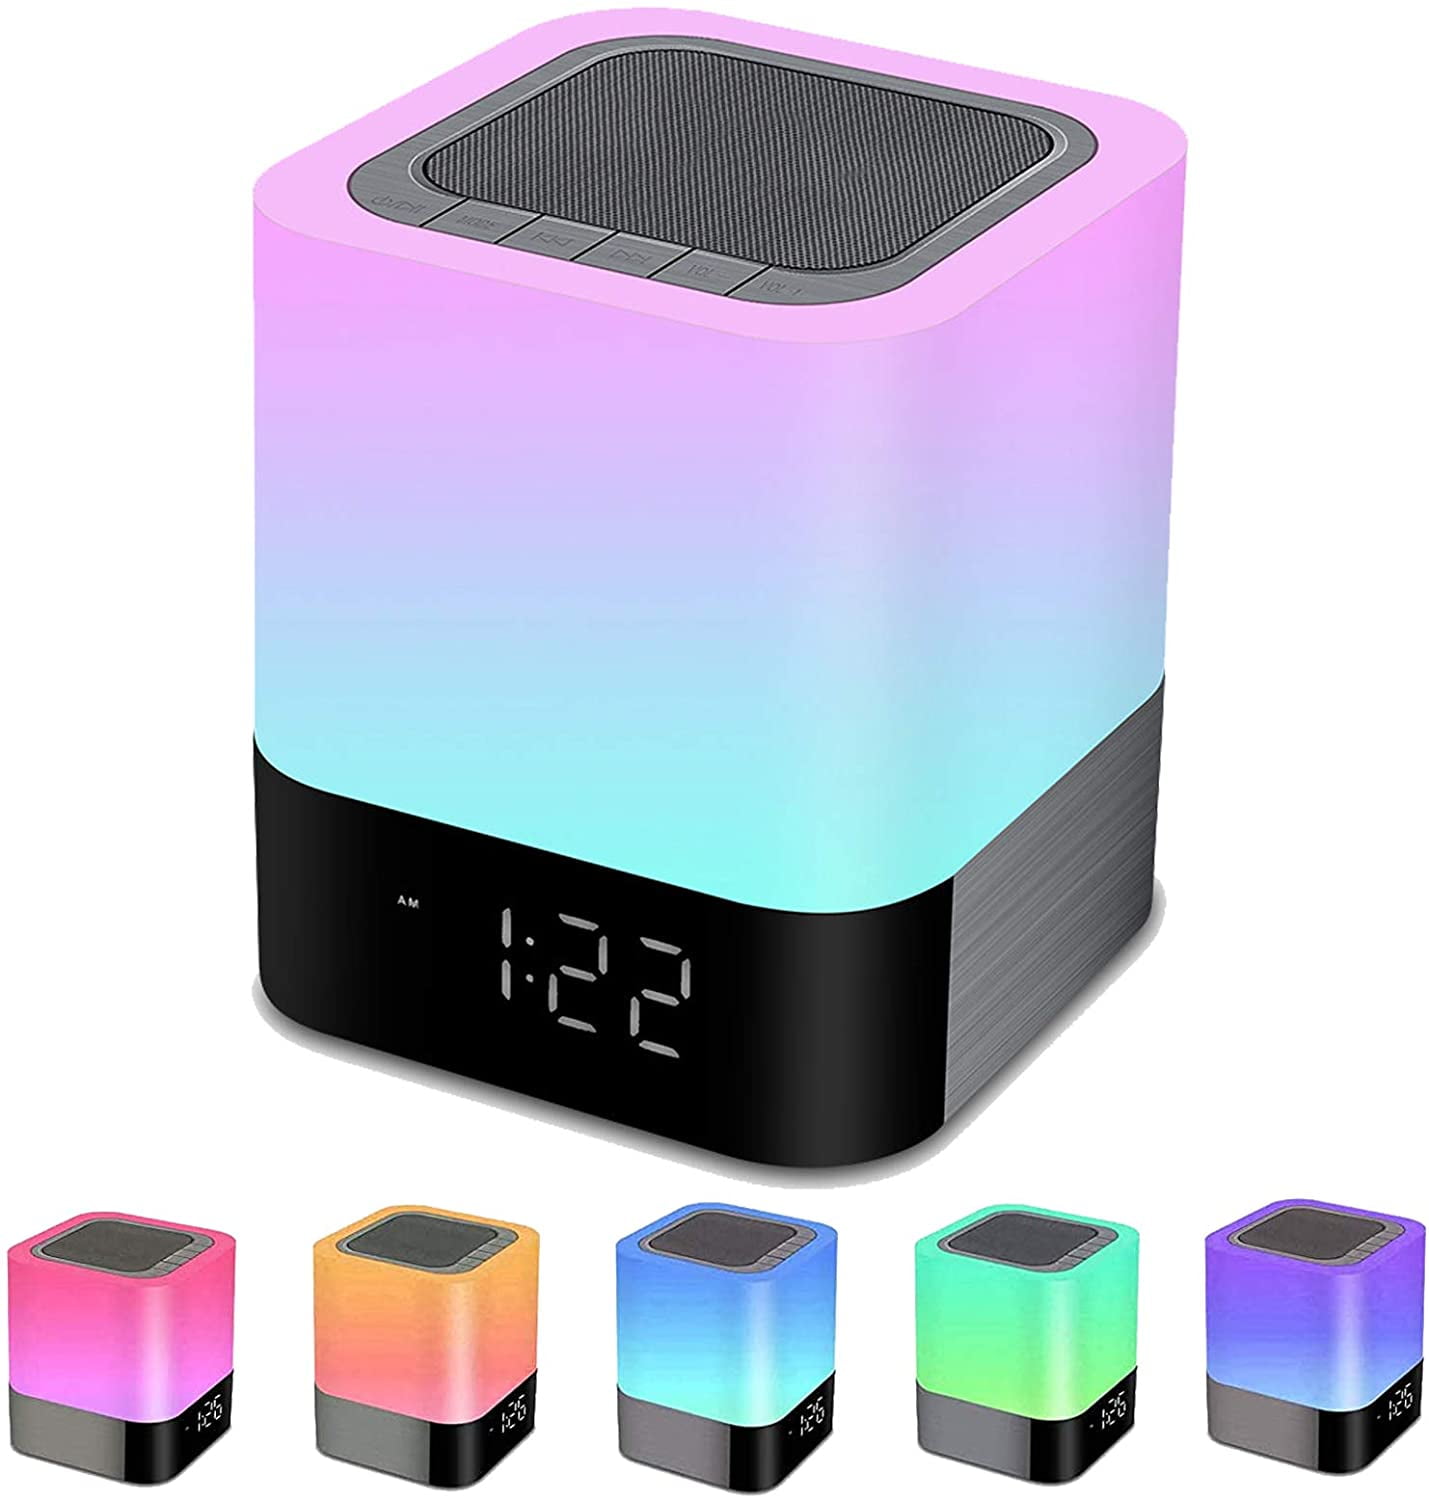 dpnao Nightstand Alarm Clock with Wireless Charging,Bluetooth Speaker,Night Light,USB Charging Port,Dimmable Large Numbers Display,Simple to Operate